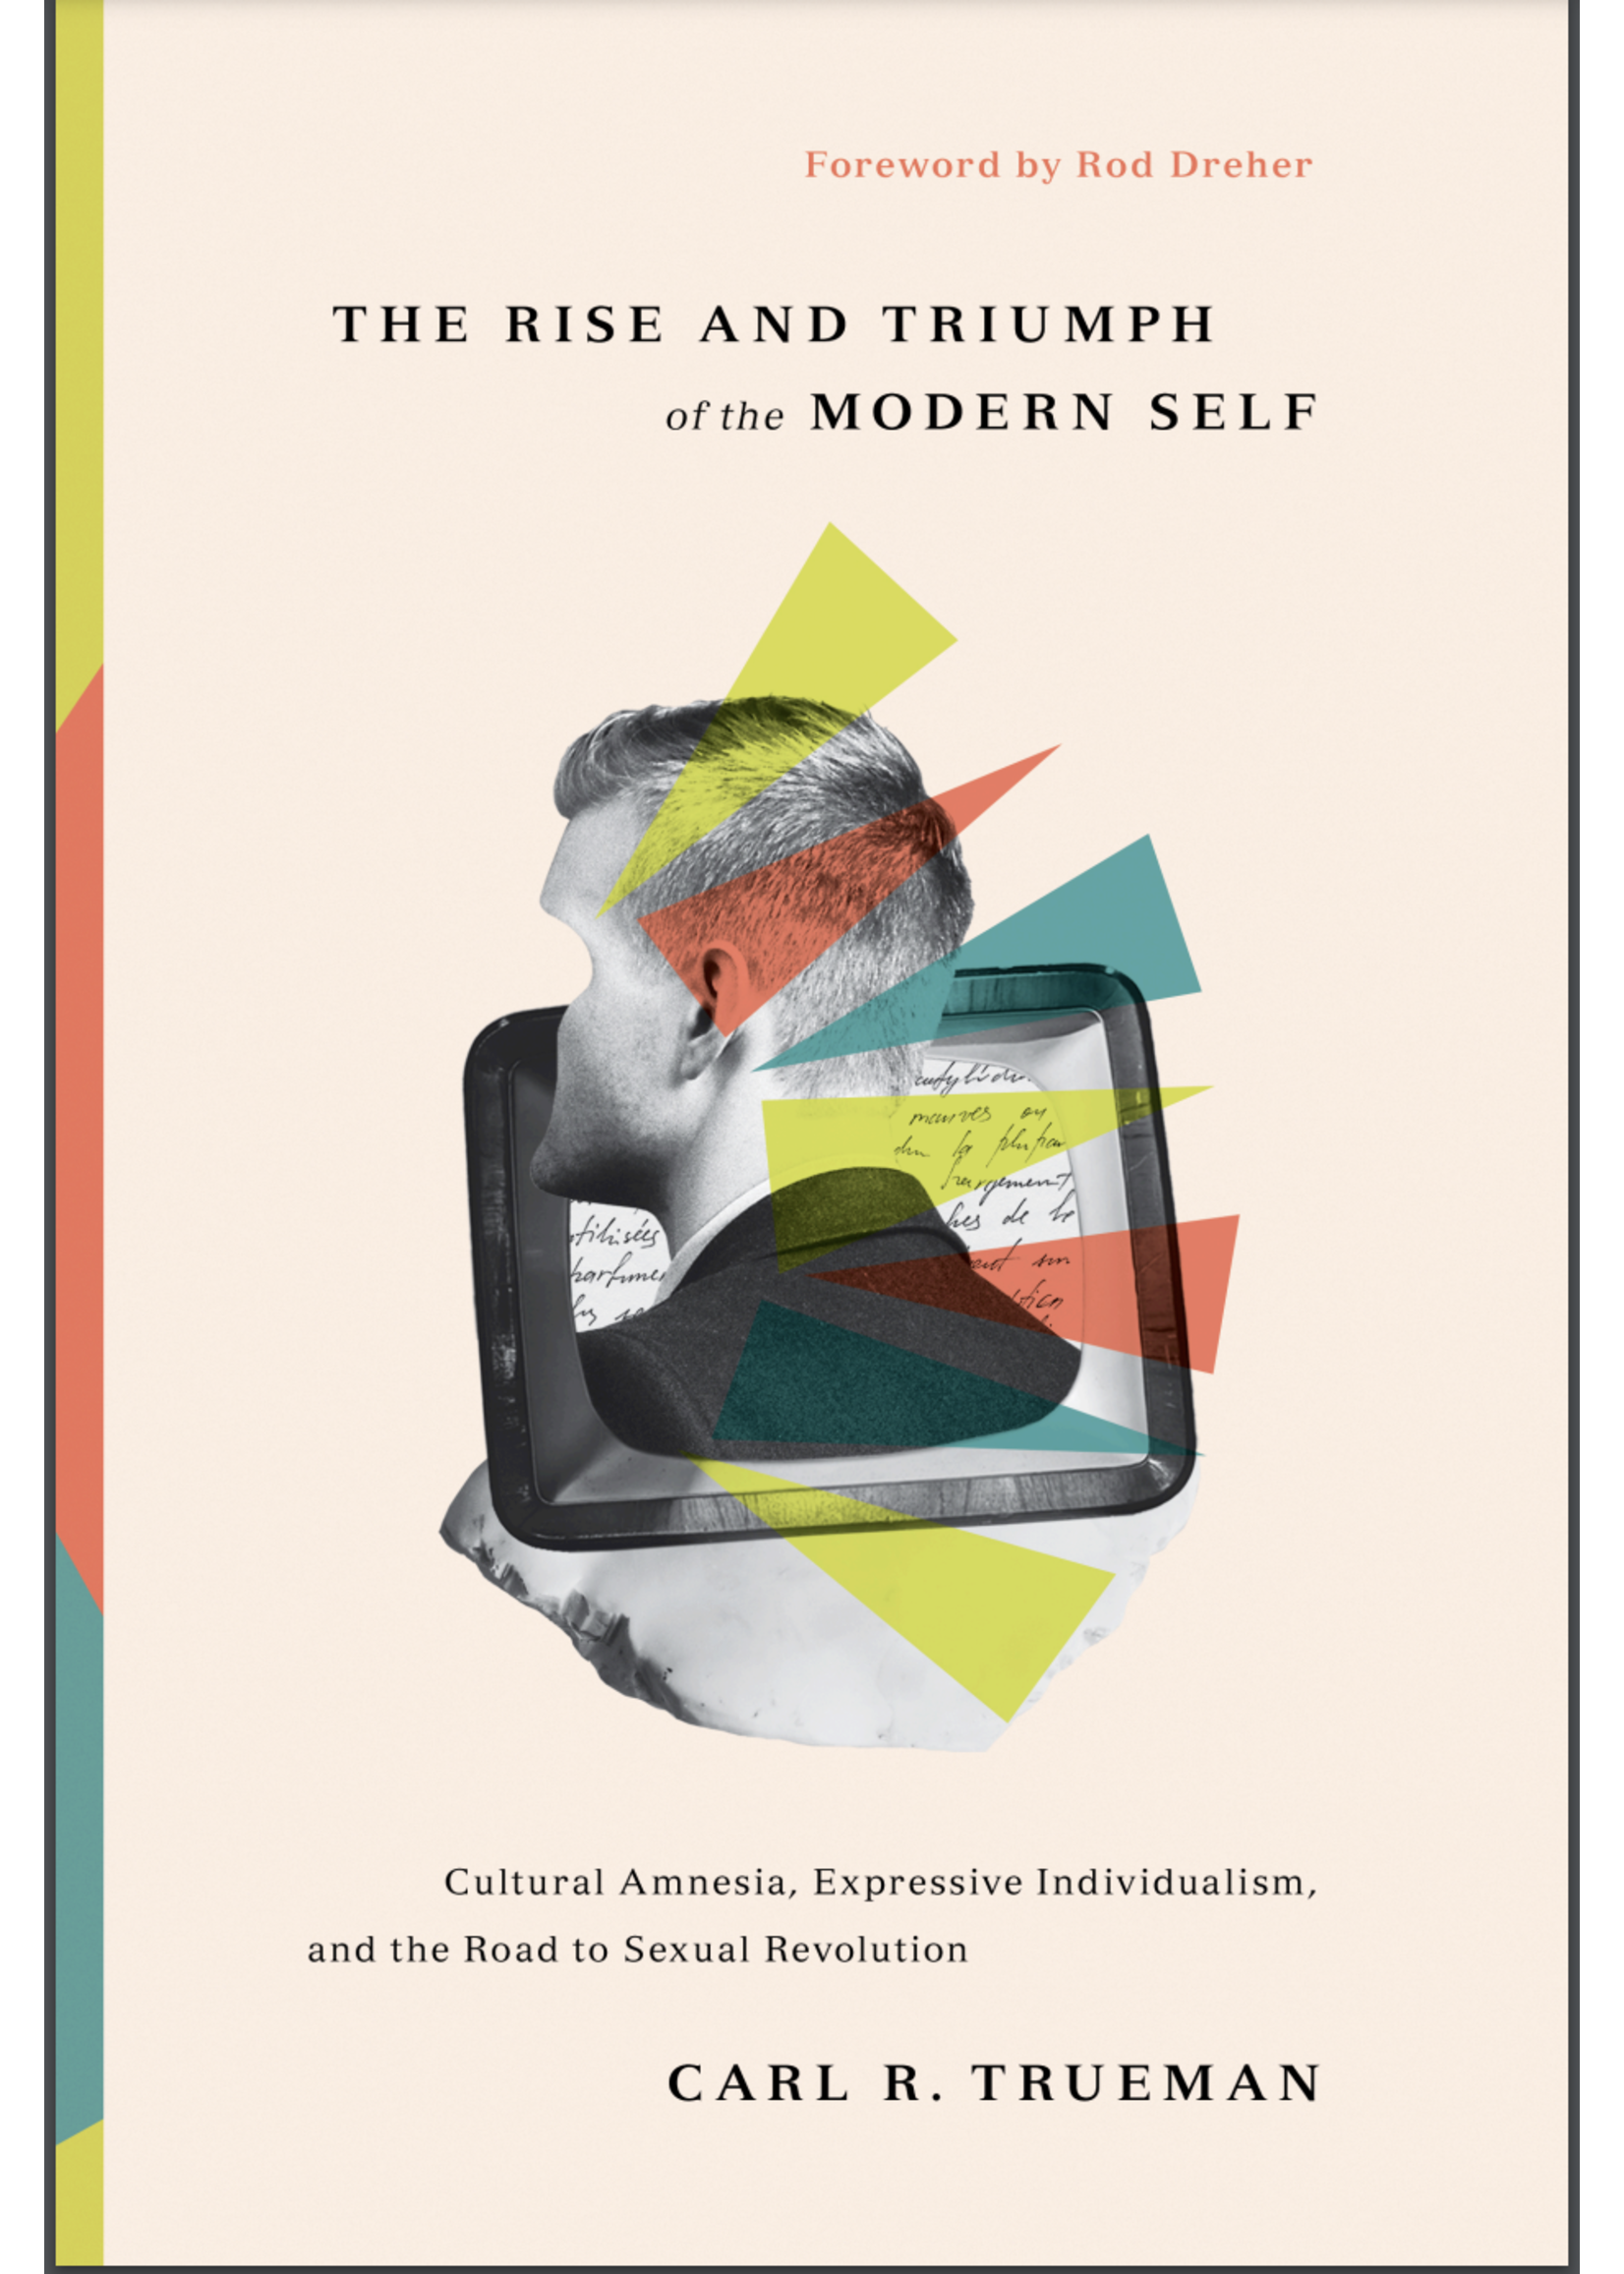 TRUEMAN, CARL The Rise and Triumph of the Modern Self: Cultural Amnesia, Expressive Individualism, and the Road to Sexual Revolution